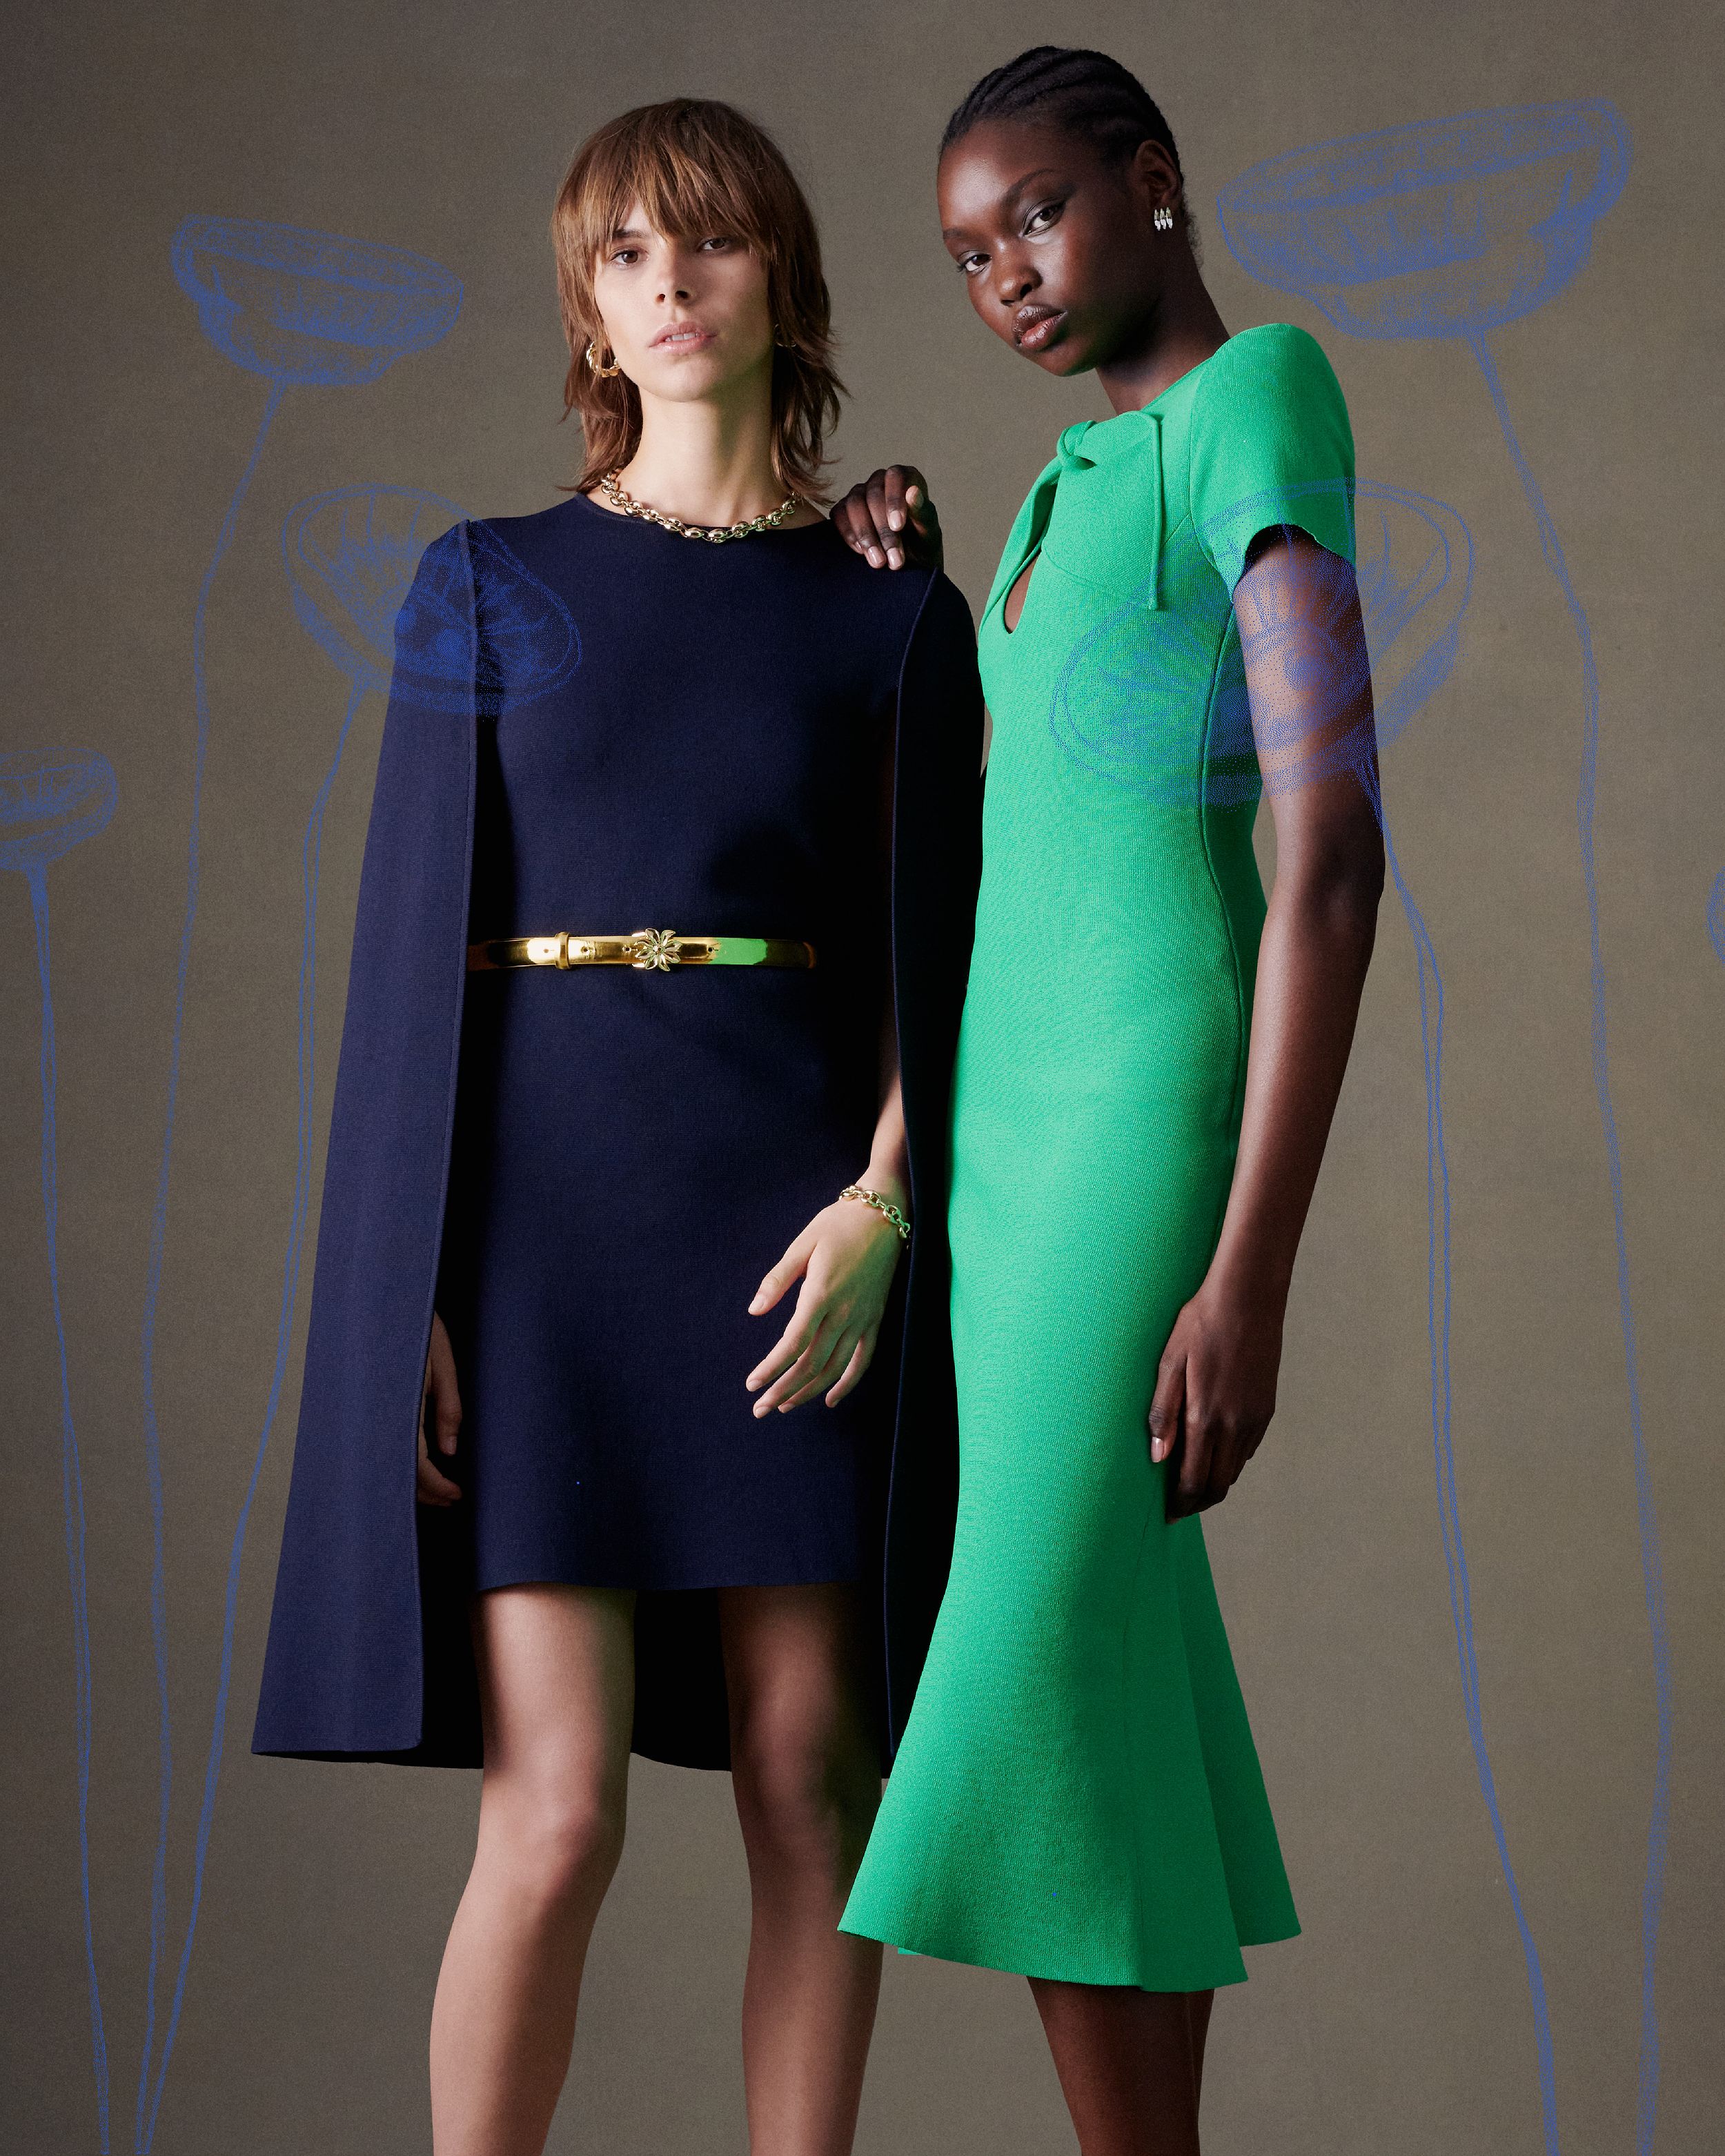 Two models standing together - one wears a navy Crepe Knit cape dress and the other an emerald Crepe Knit dress 